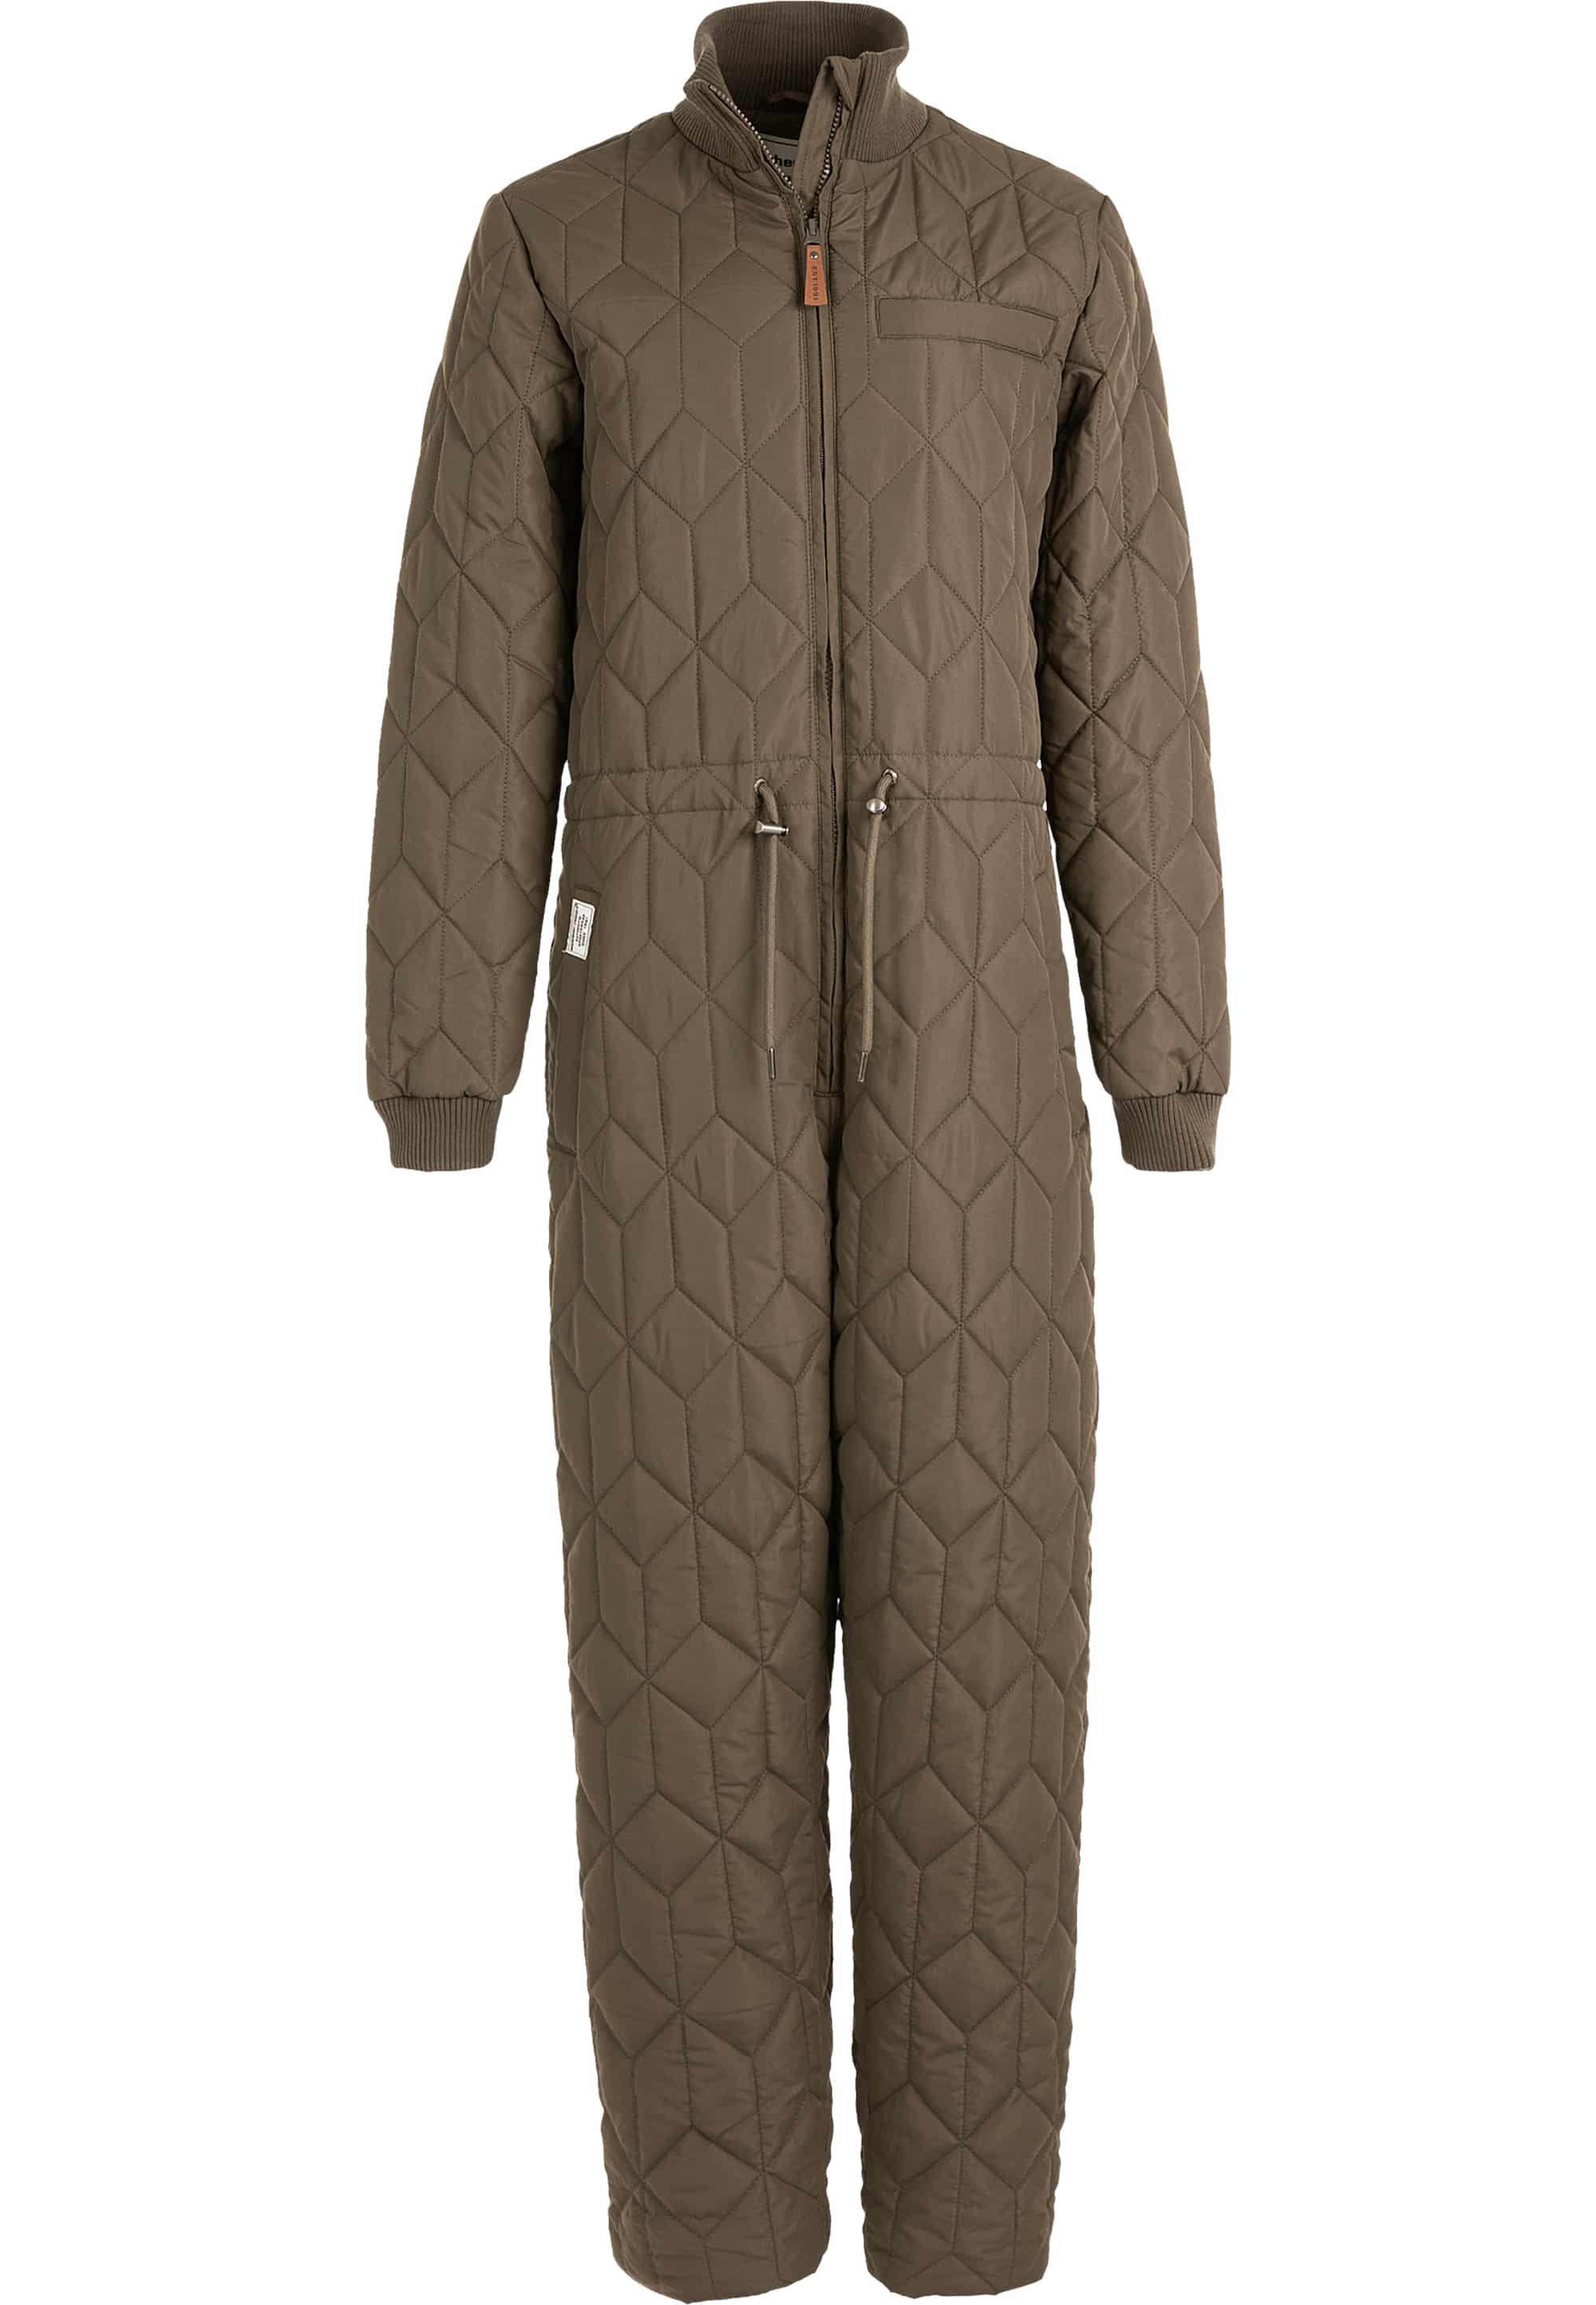 WEATHER REPORT Vidda W Quilted Jumpsuit Oliven - Oliven